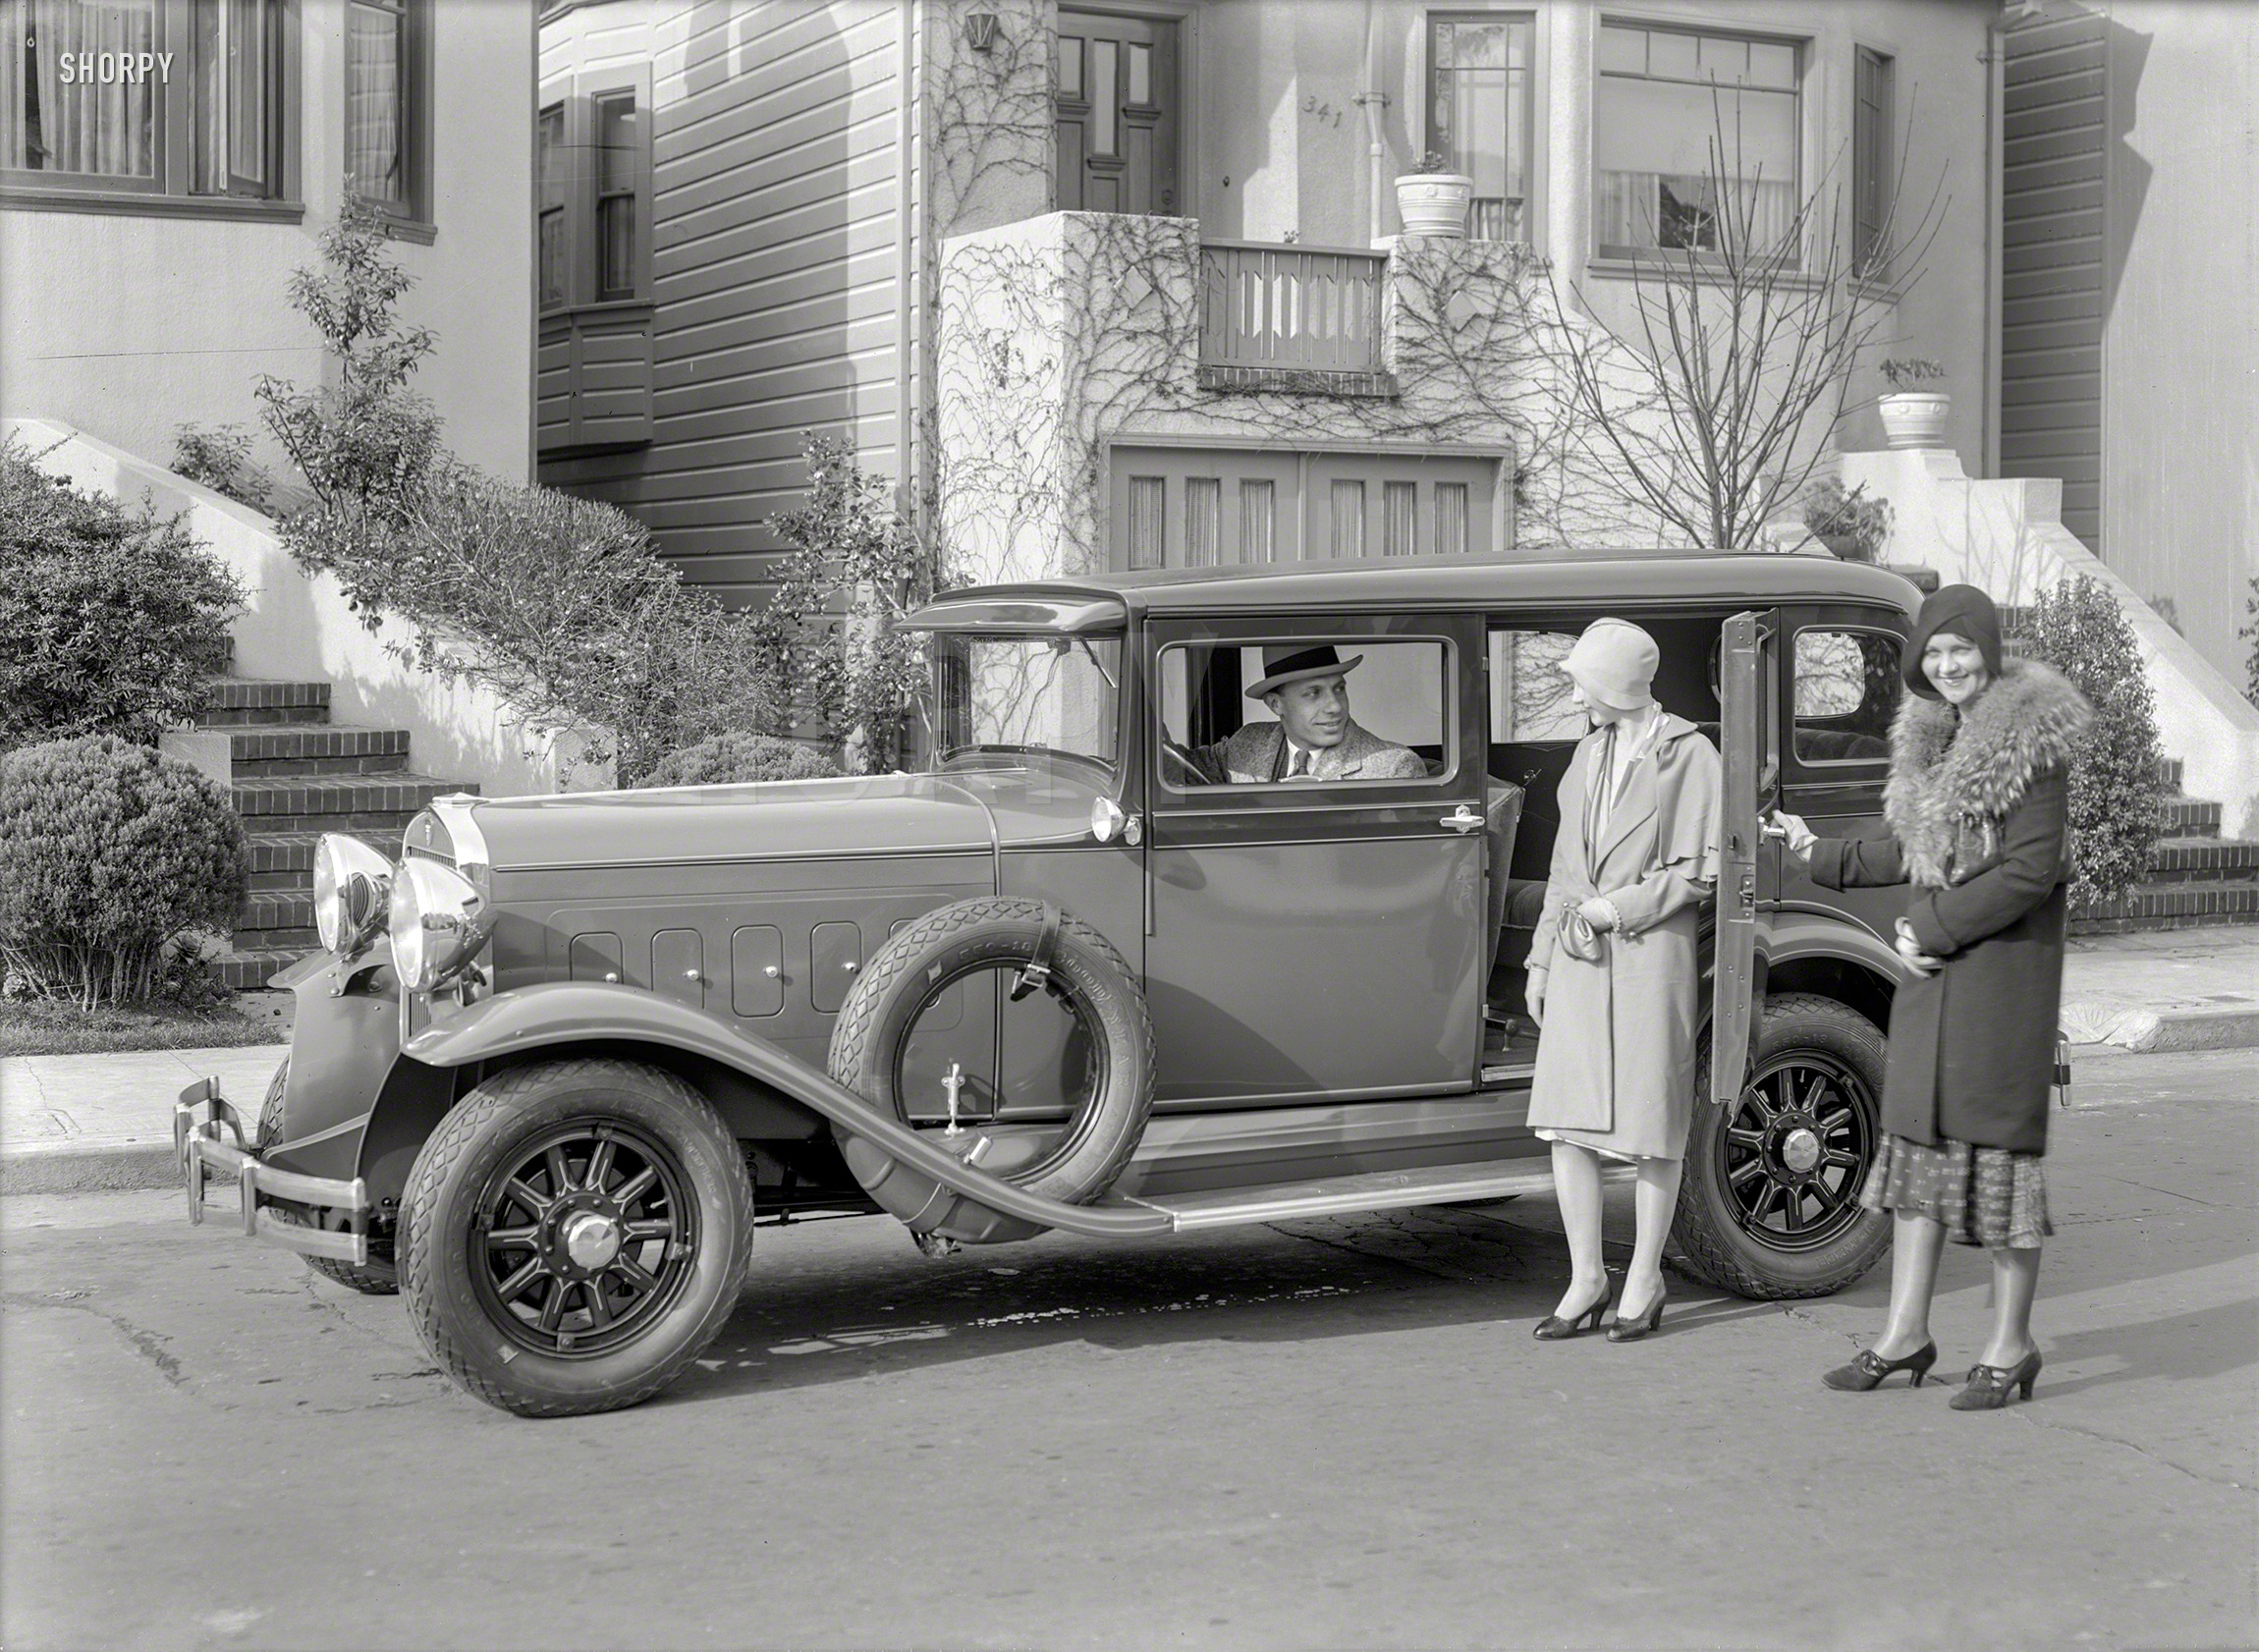 San Francisco circa 1930. "Hudson 8 sedan." Who'll be first to Street View this house? 5x7 glass negative by Christopher Helin. View full size.